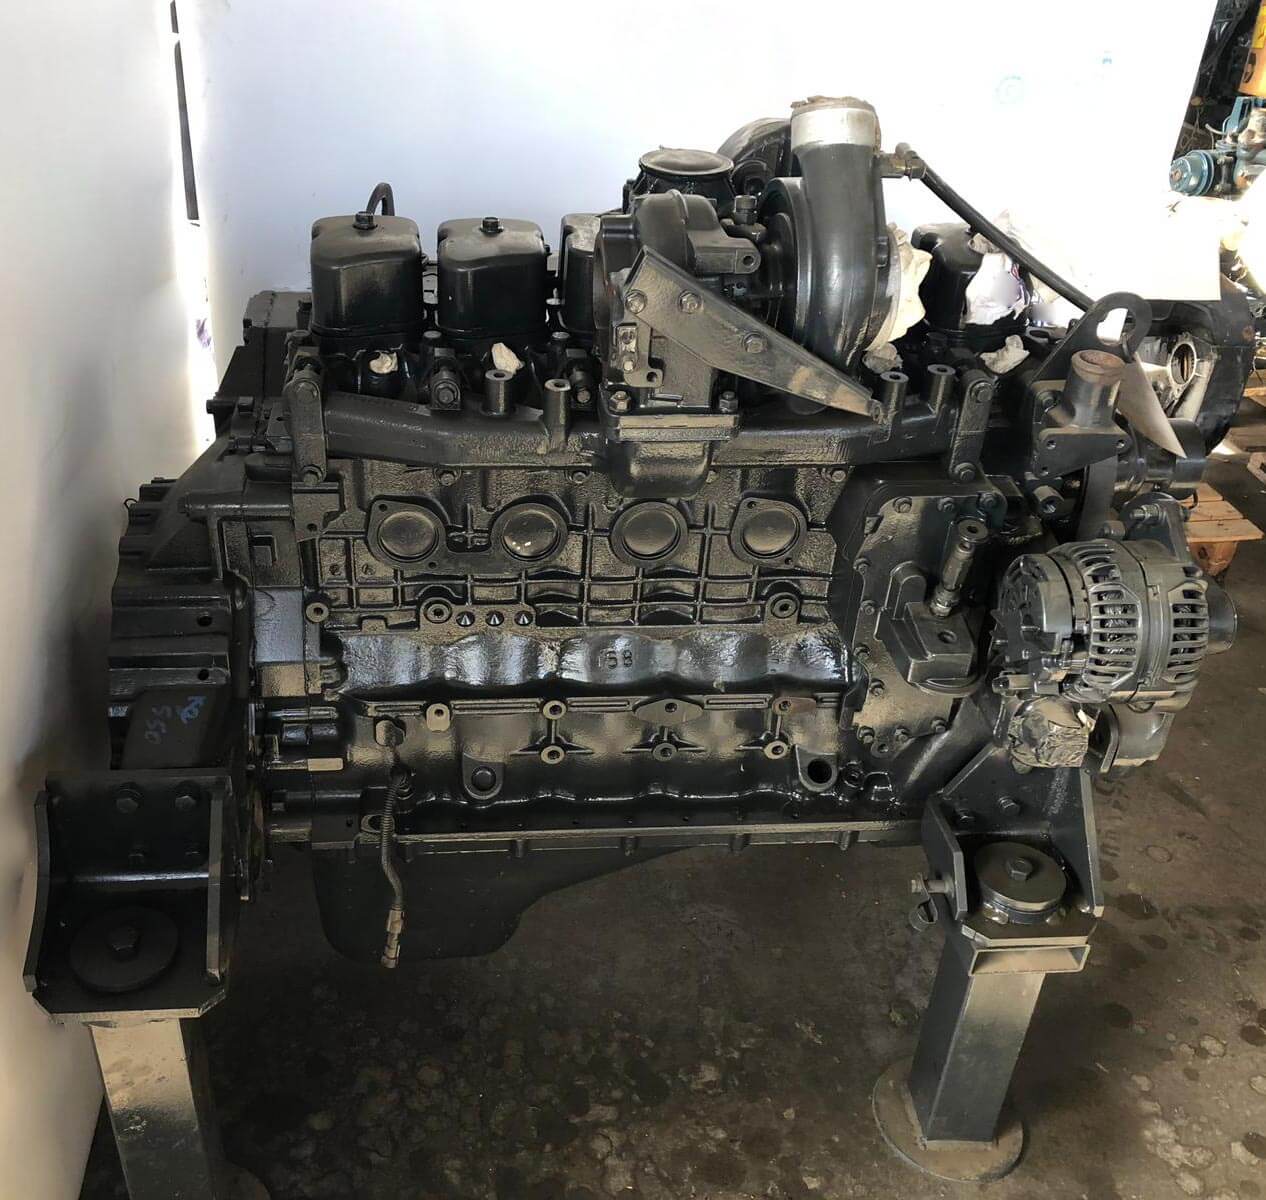 IVECO/NEF/FPT F4GE0684 Engine (REMANUFACTURED) | Engineswarehouse.com